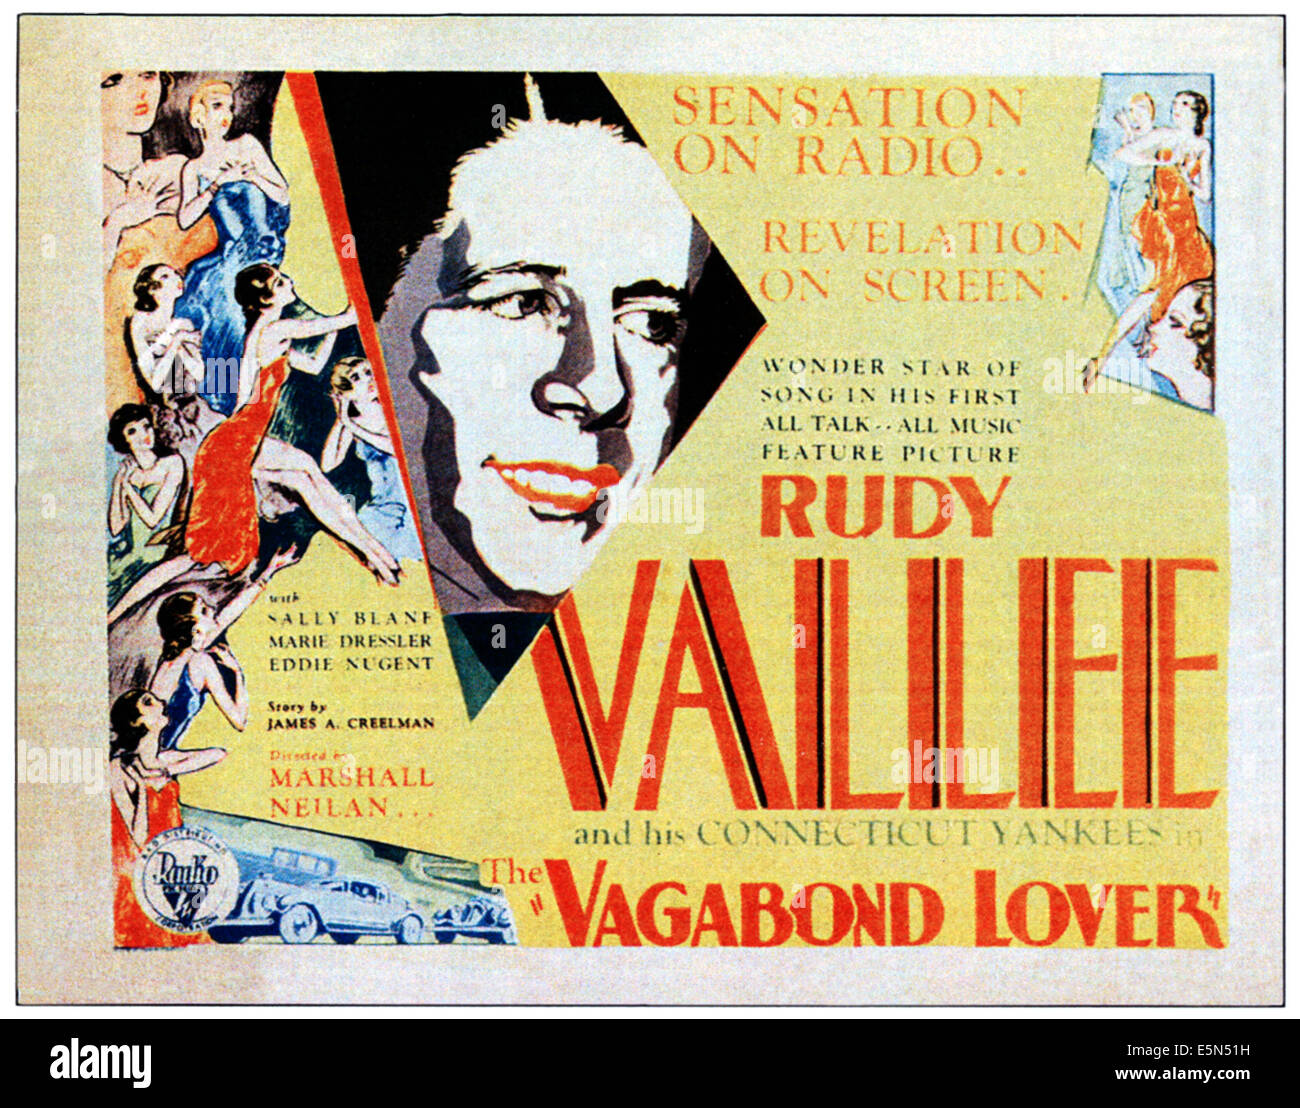 THE VAGABOND LOVER, Rudy Vallee on title card, 1929 Stock Photo - Alamy